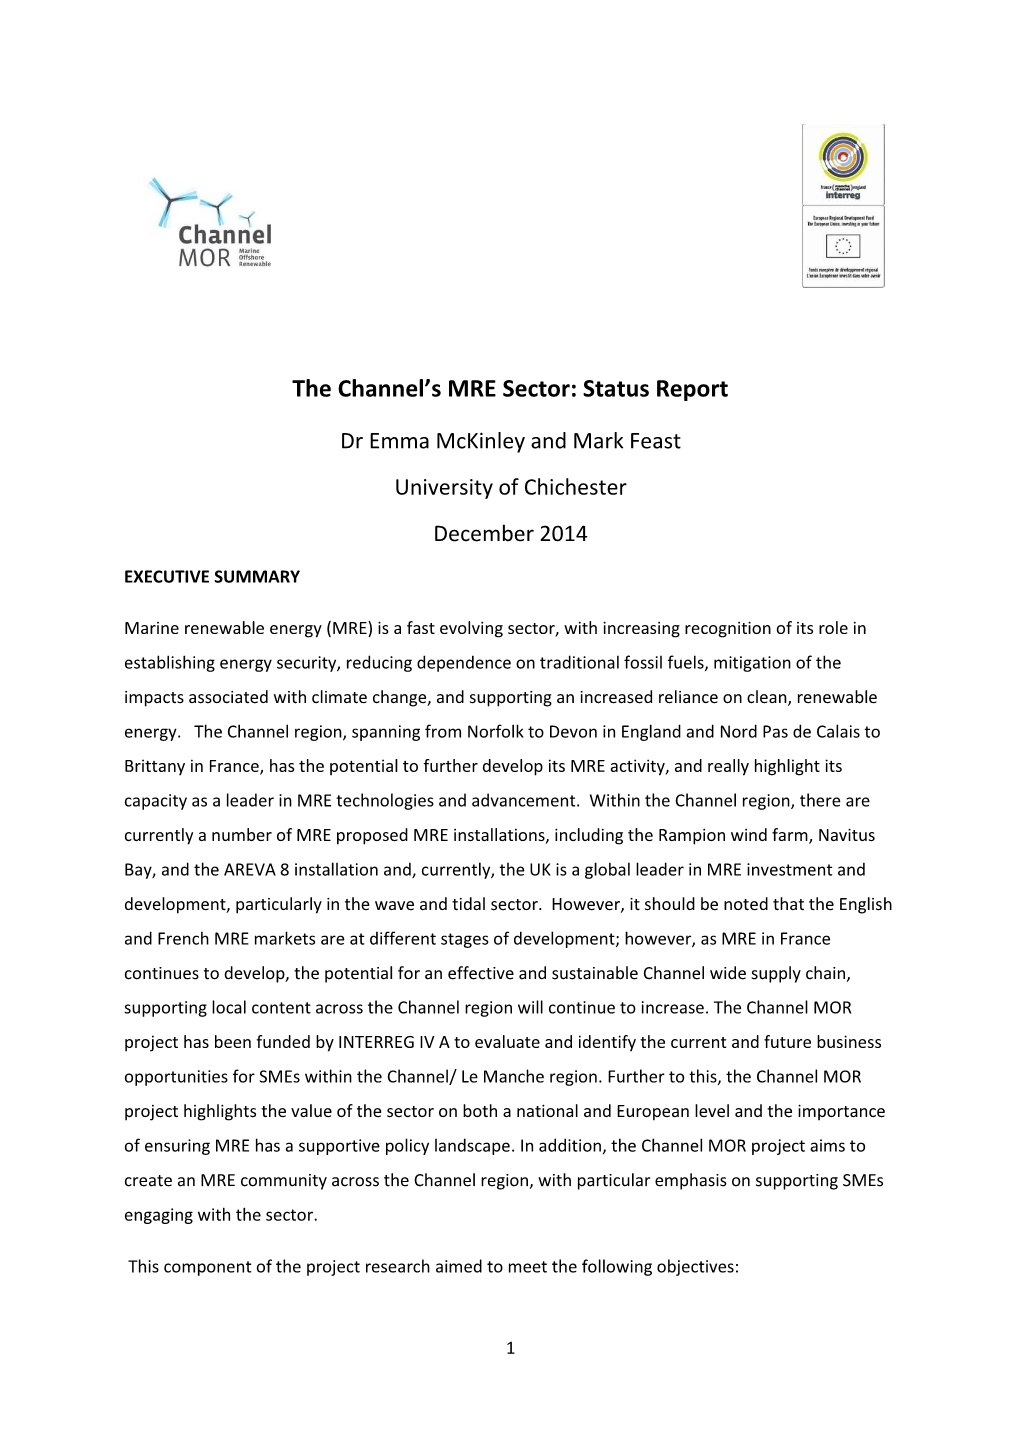 The Channel's MRE Sector: Status Report